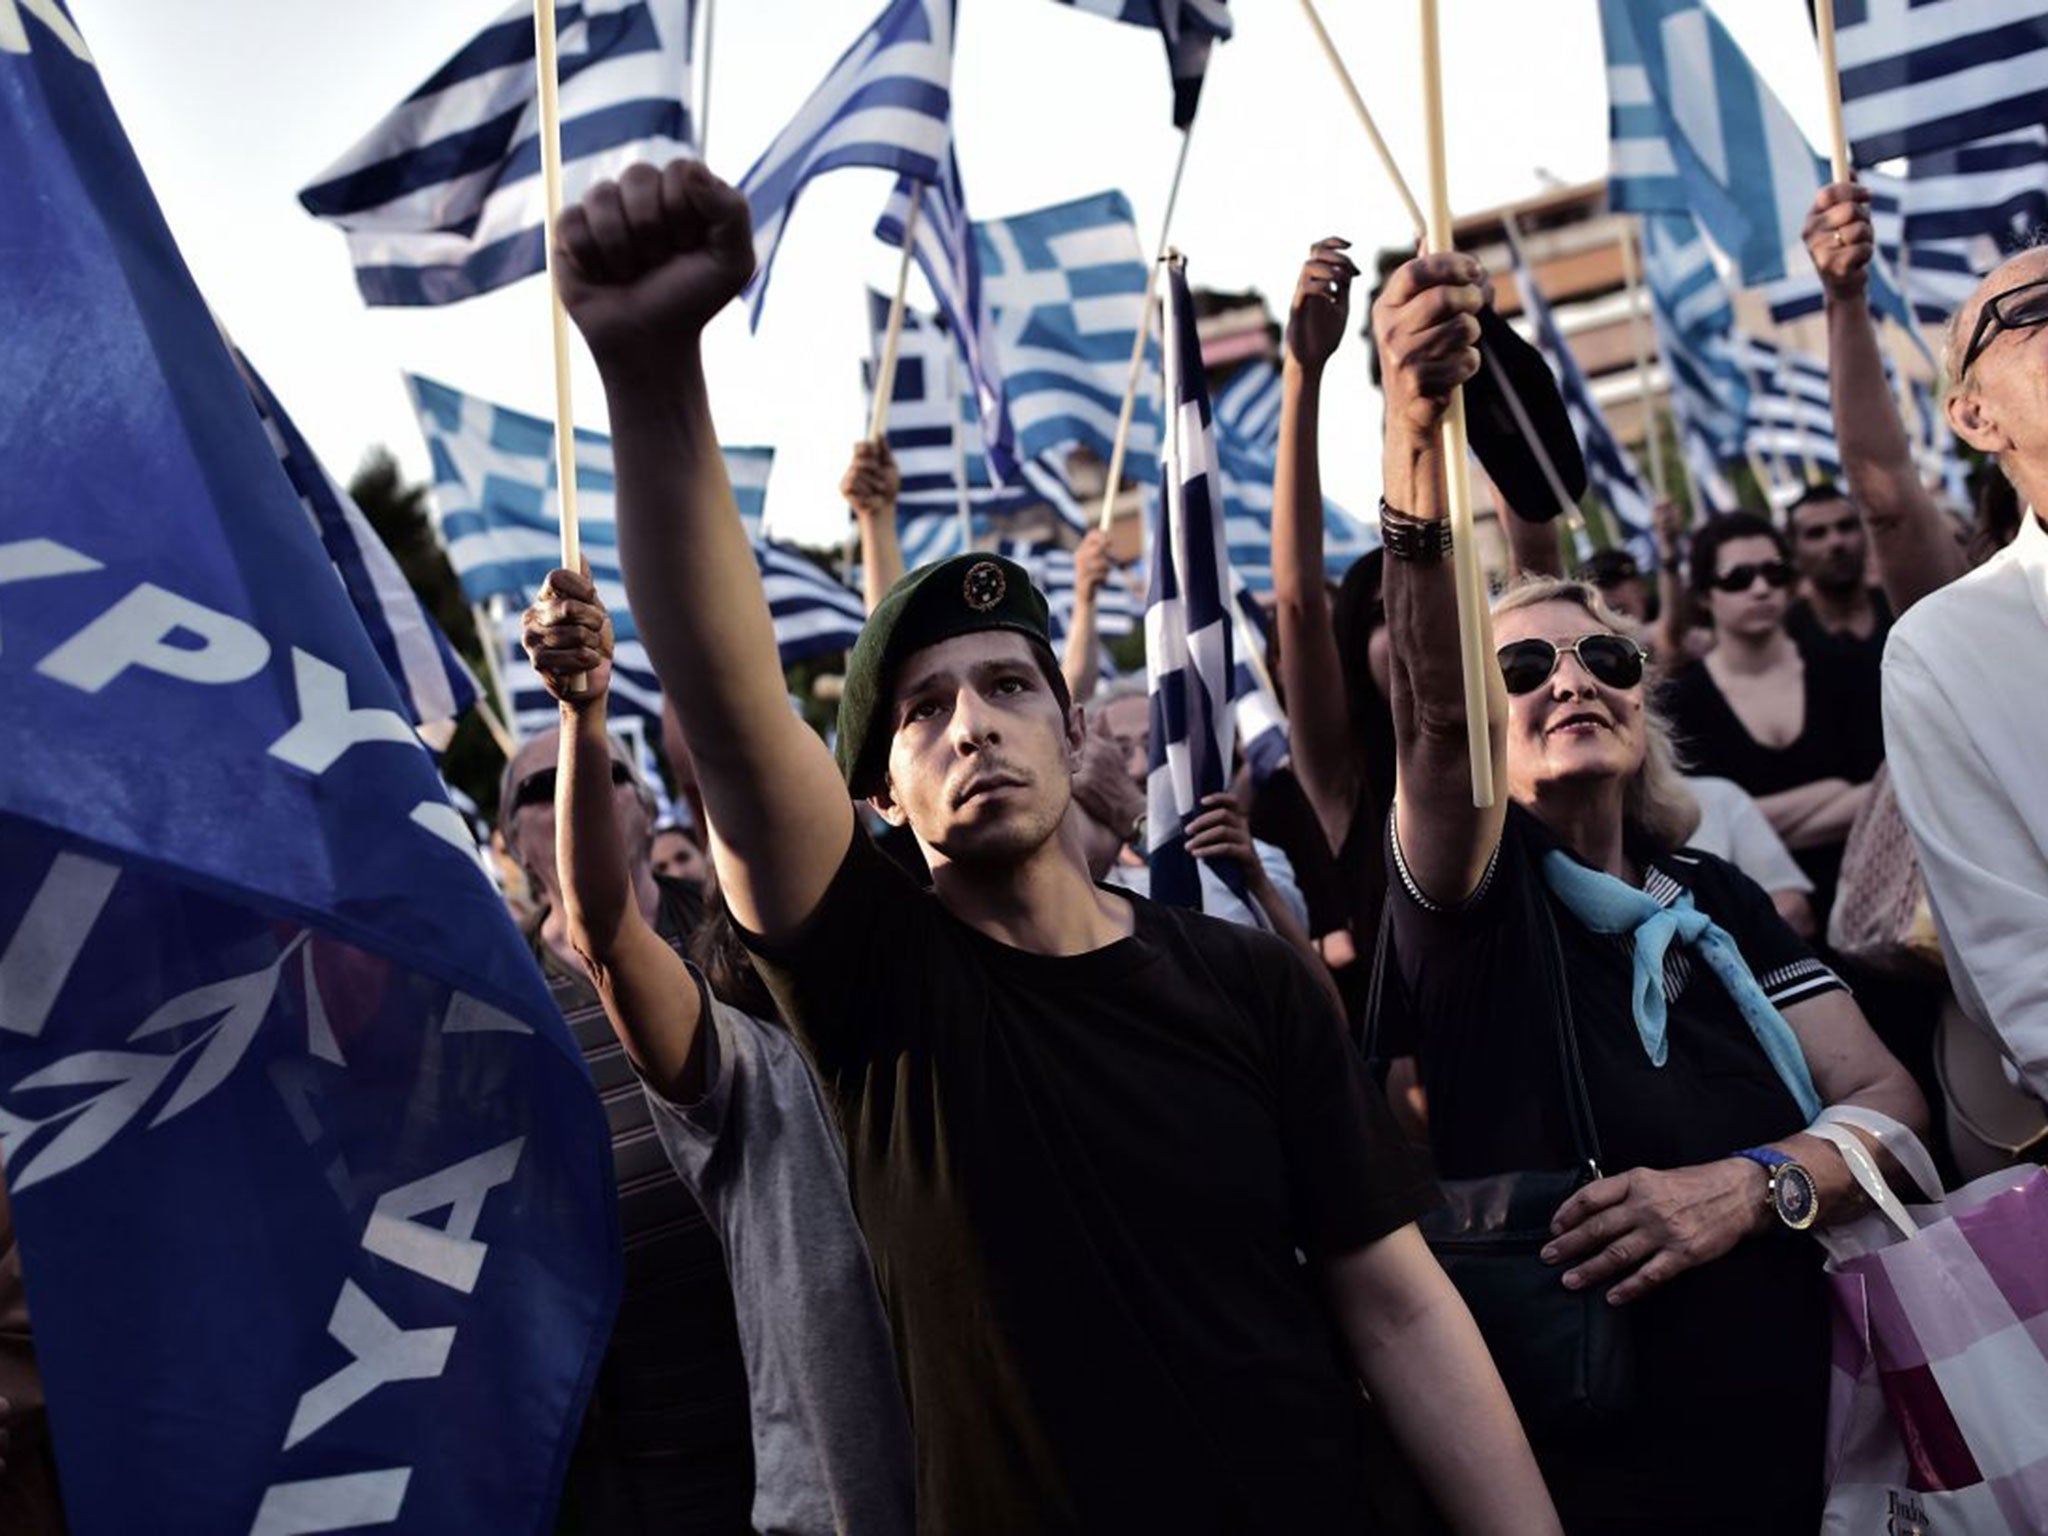 The Greek ultra-nationalist Golden Dawn is one of the emerging parties shaking up the EU